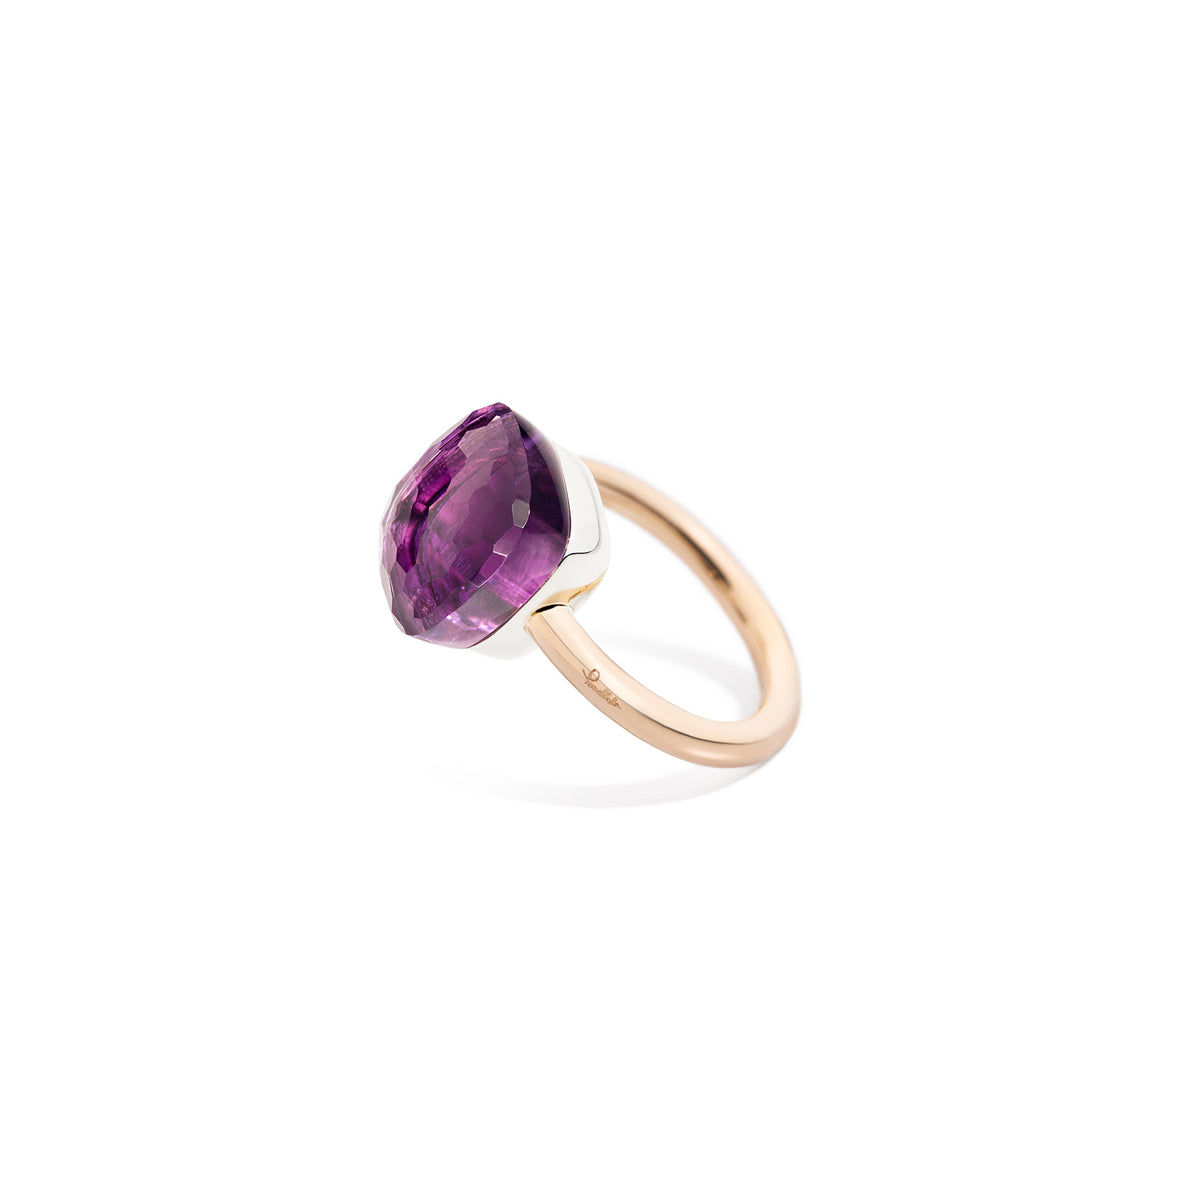 Nudo Maxi Ring in 18k Rose Gold and White Gold with Amethyst - Orsini Jewellers NZ